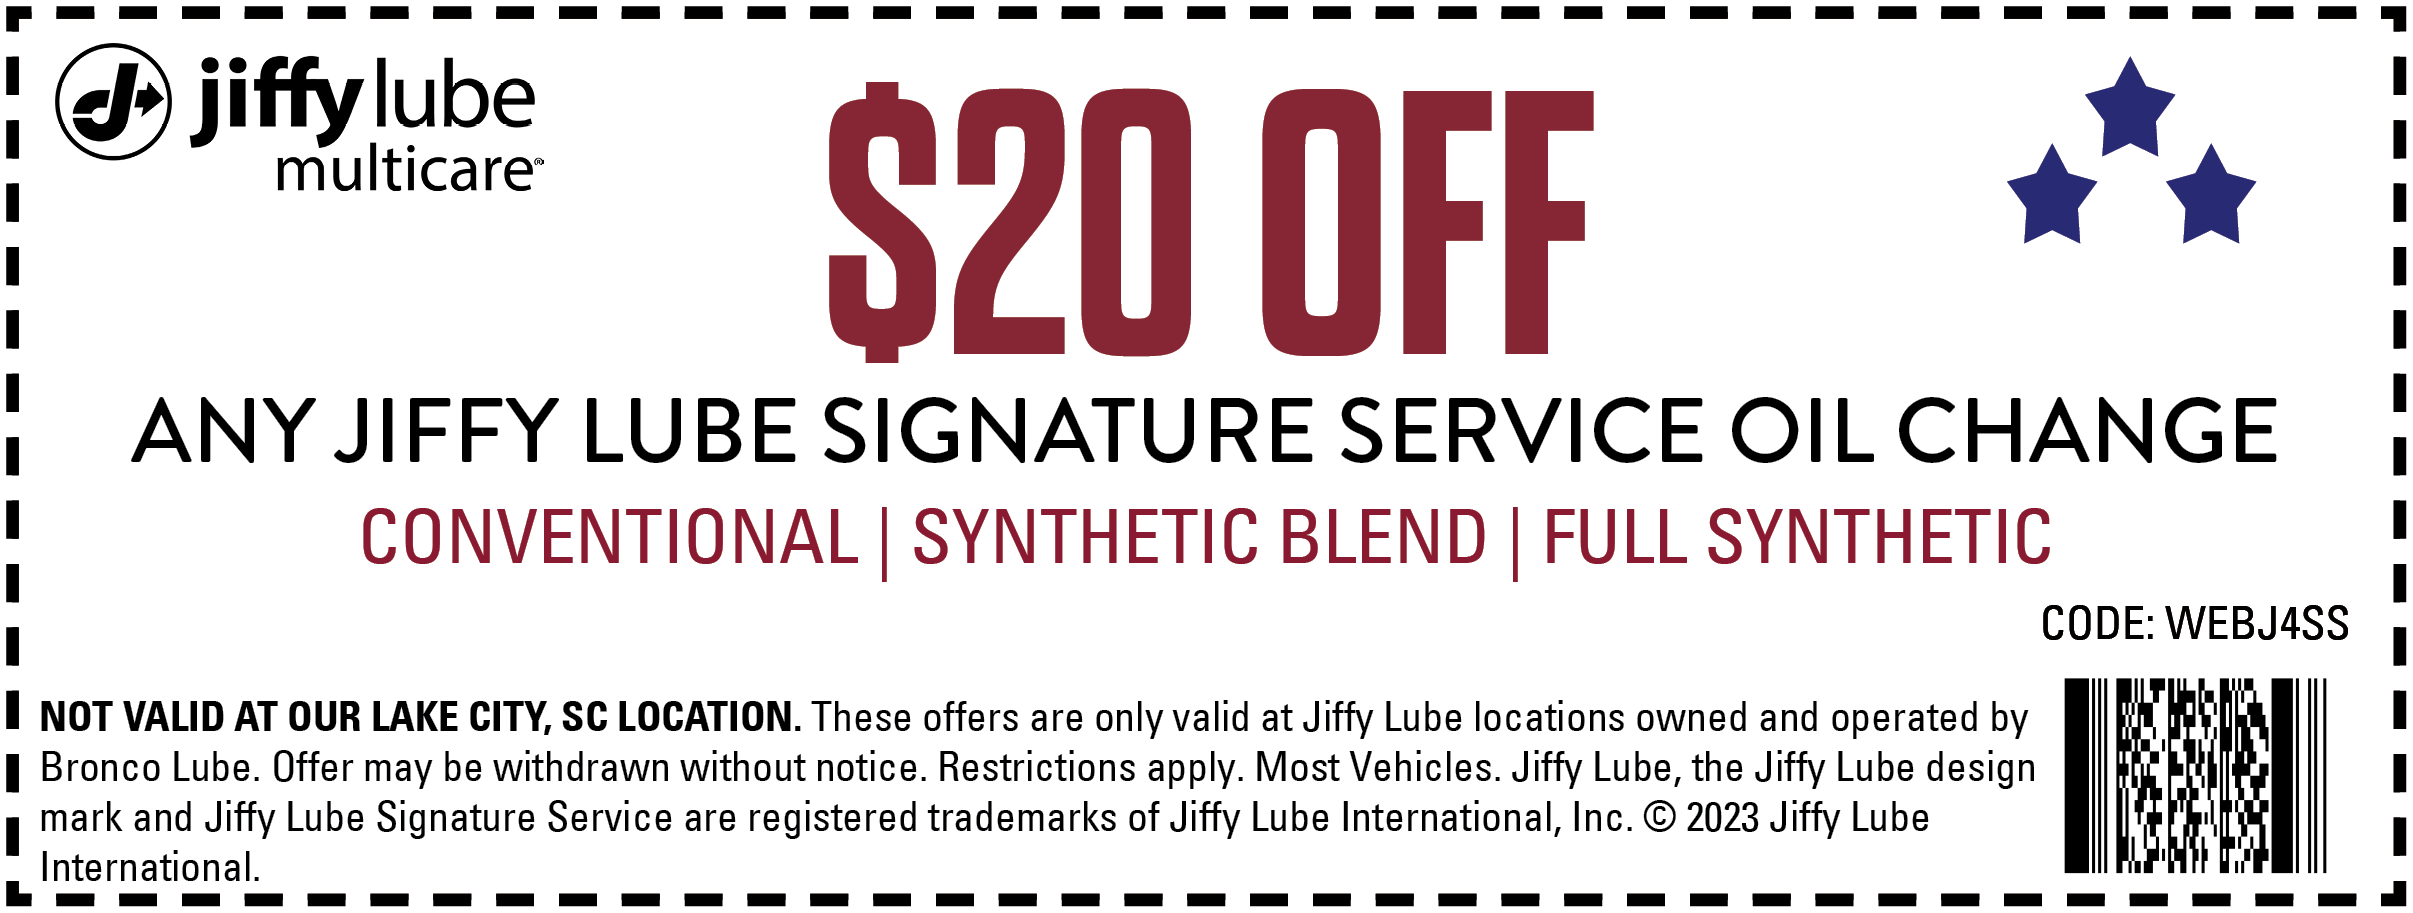 jiffy lube air conditioning service coupon